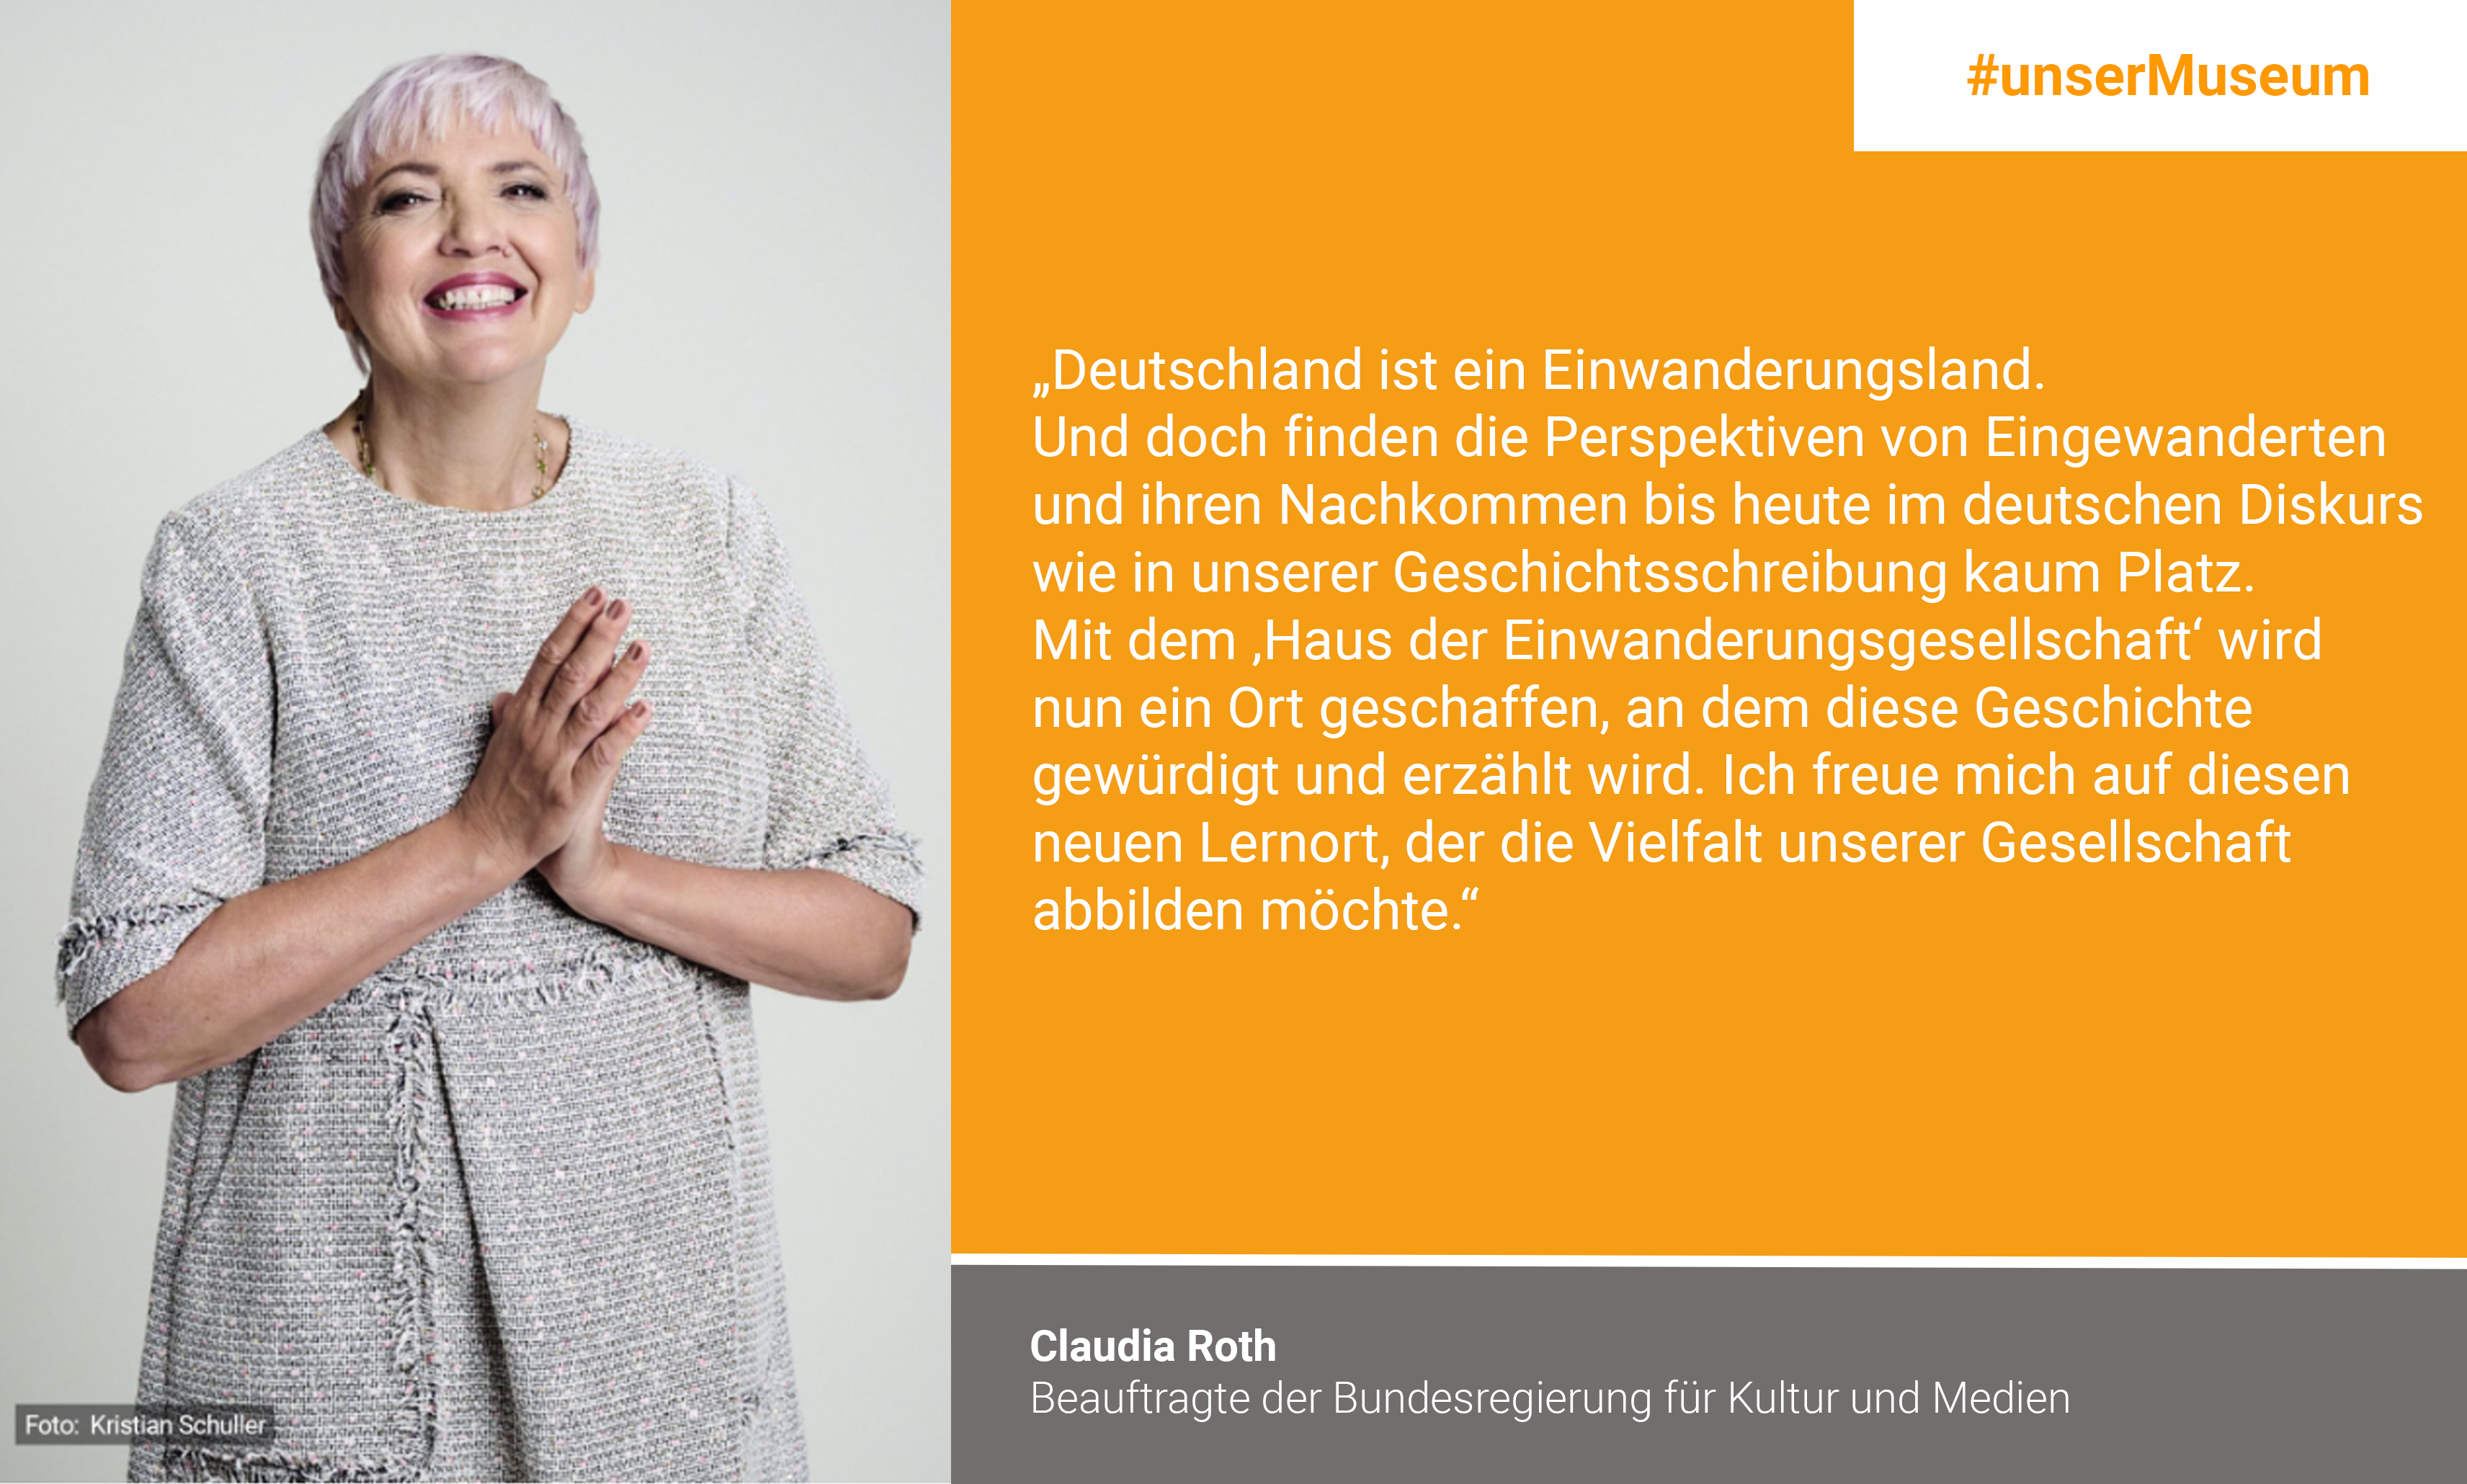 Claudia Roth, Federal Government Commissioner for Culture and the Media: "Germany is a country of immigration. And yet the perspectives of immigrants and their descendants have hardly found a place in German discourse or in our historiography. With the "House of Immigration Society", a place is now being created where this history is honoured and told. I am looking forward to this new place of learning, which aims to depict the diversity of our society."